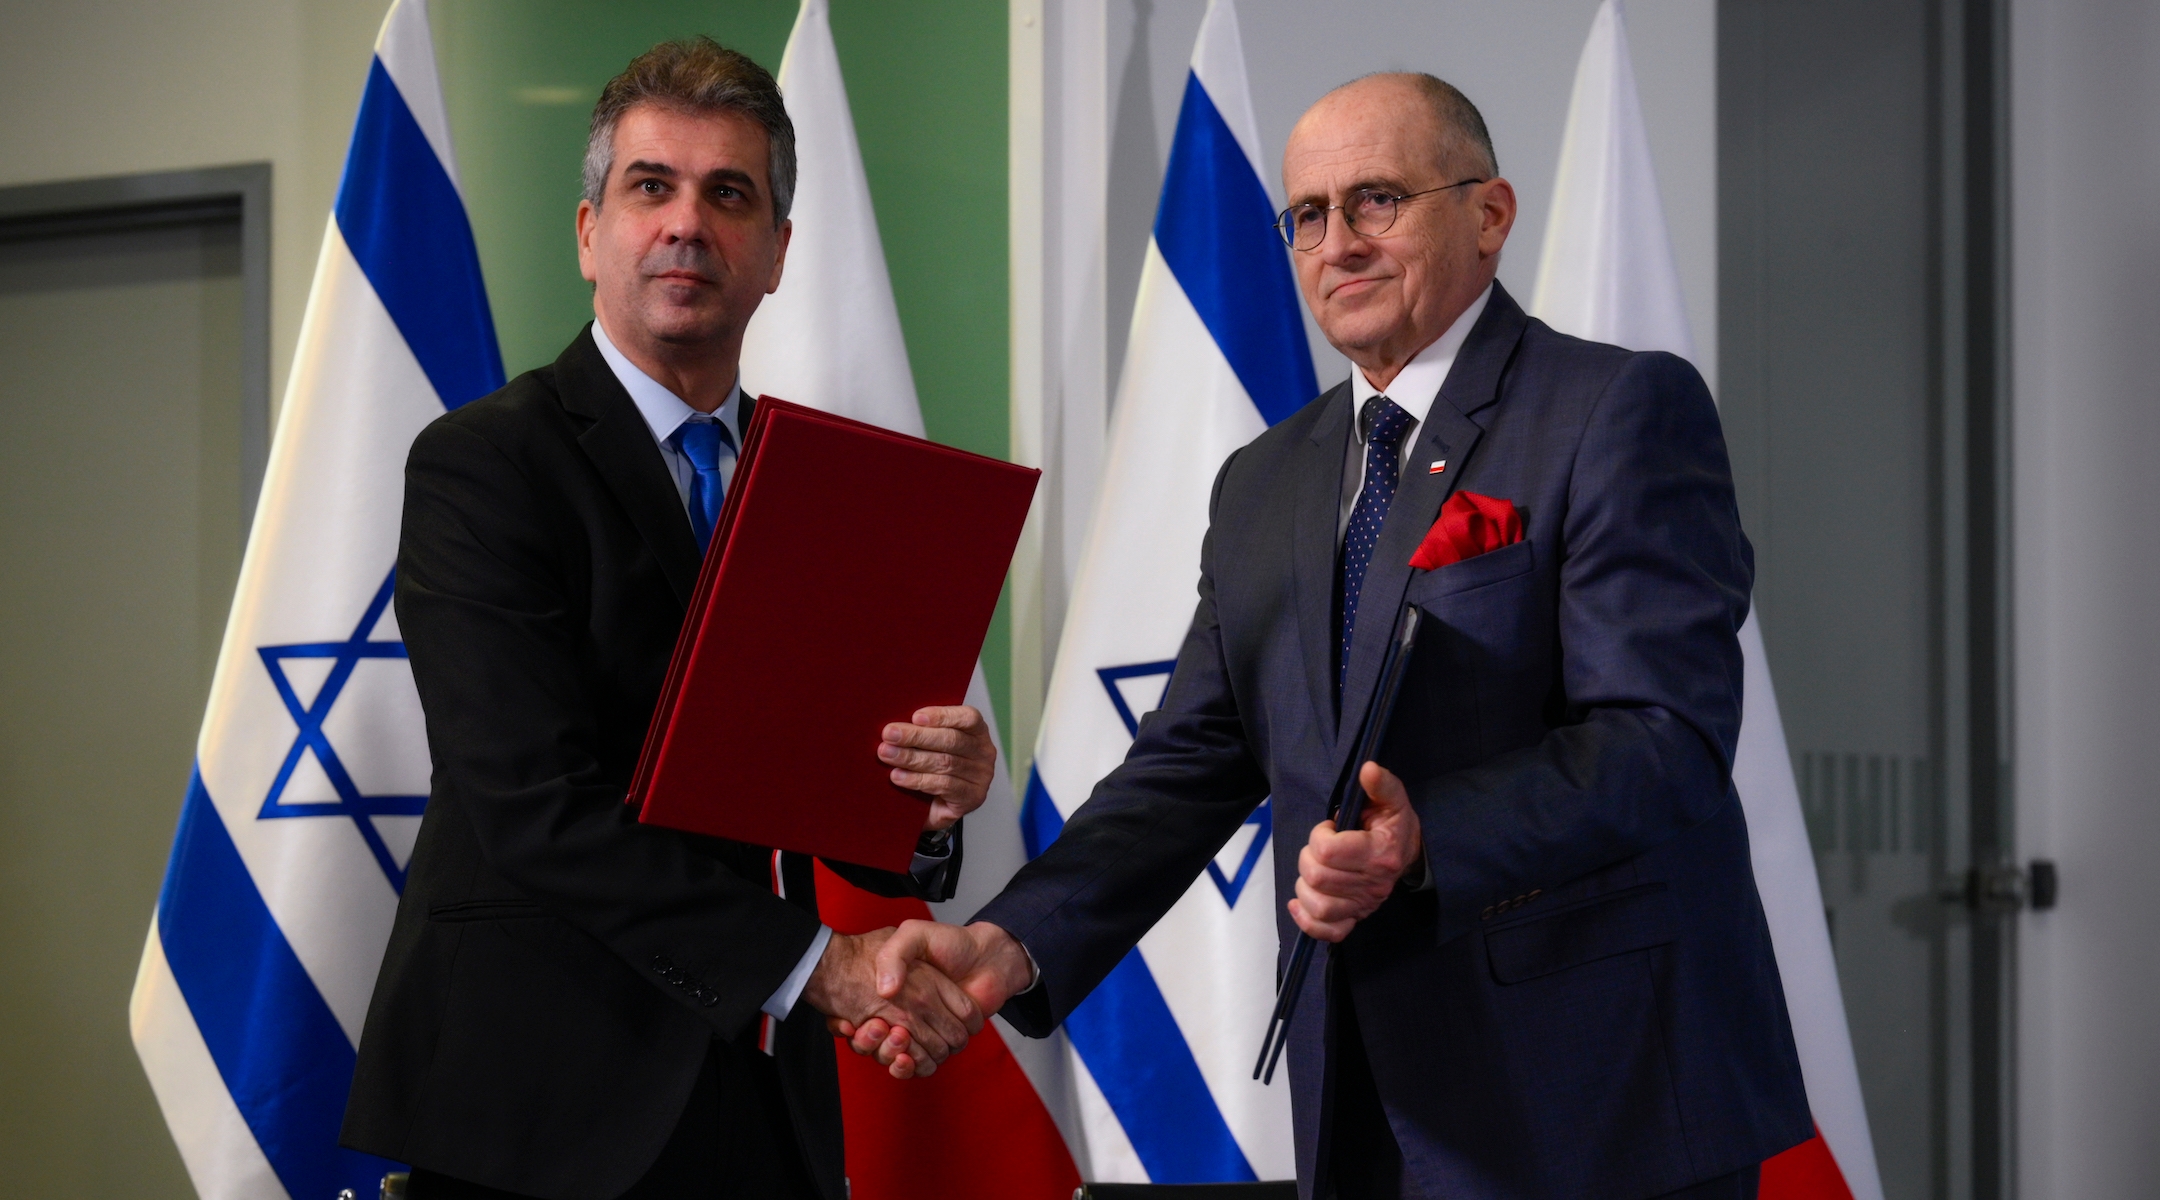 Israel says ‘crisis’ with Poland is over as the countries agree to resume student trips to Holocaust sites